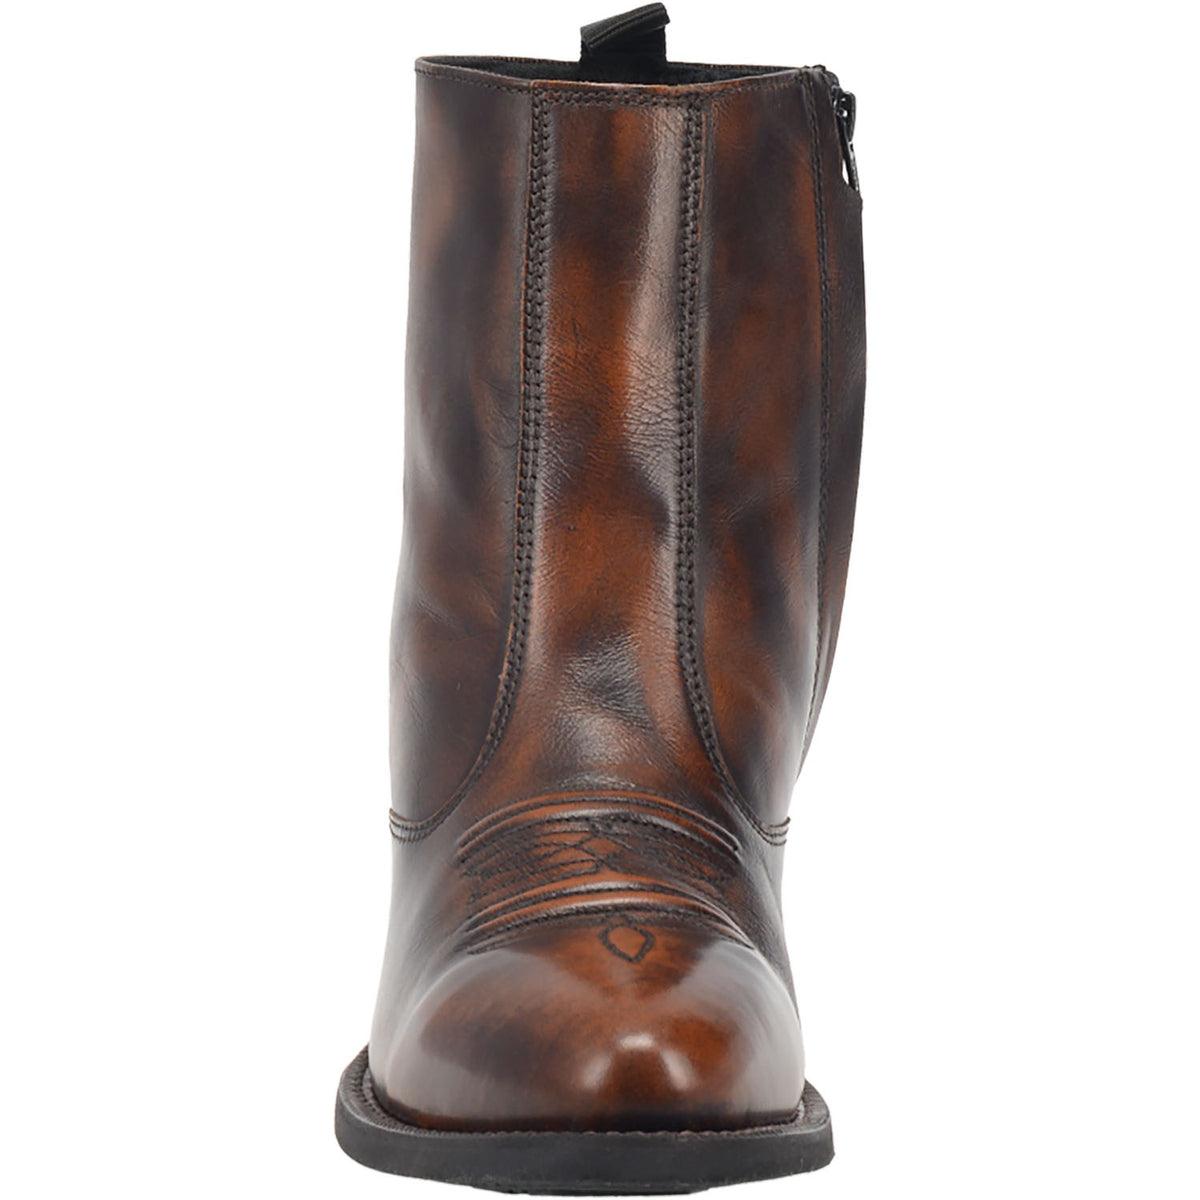 FLETCHER LEATHER BOOT Cover